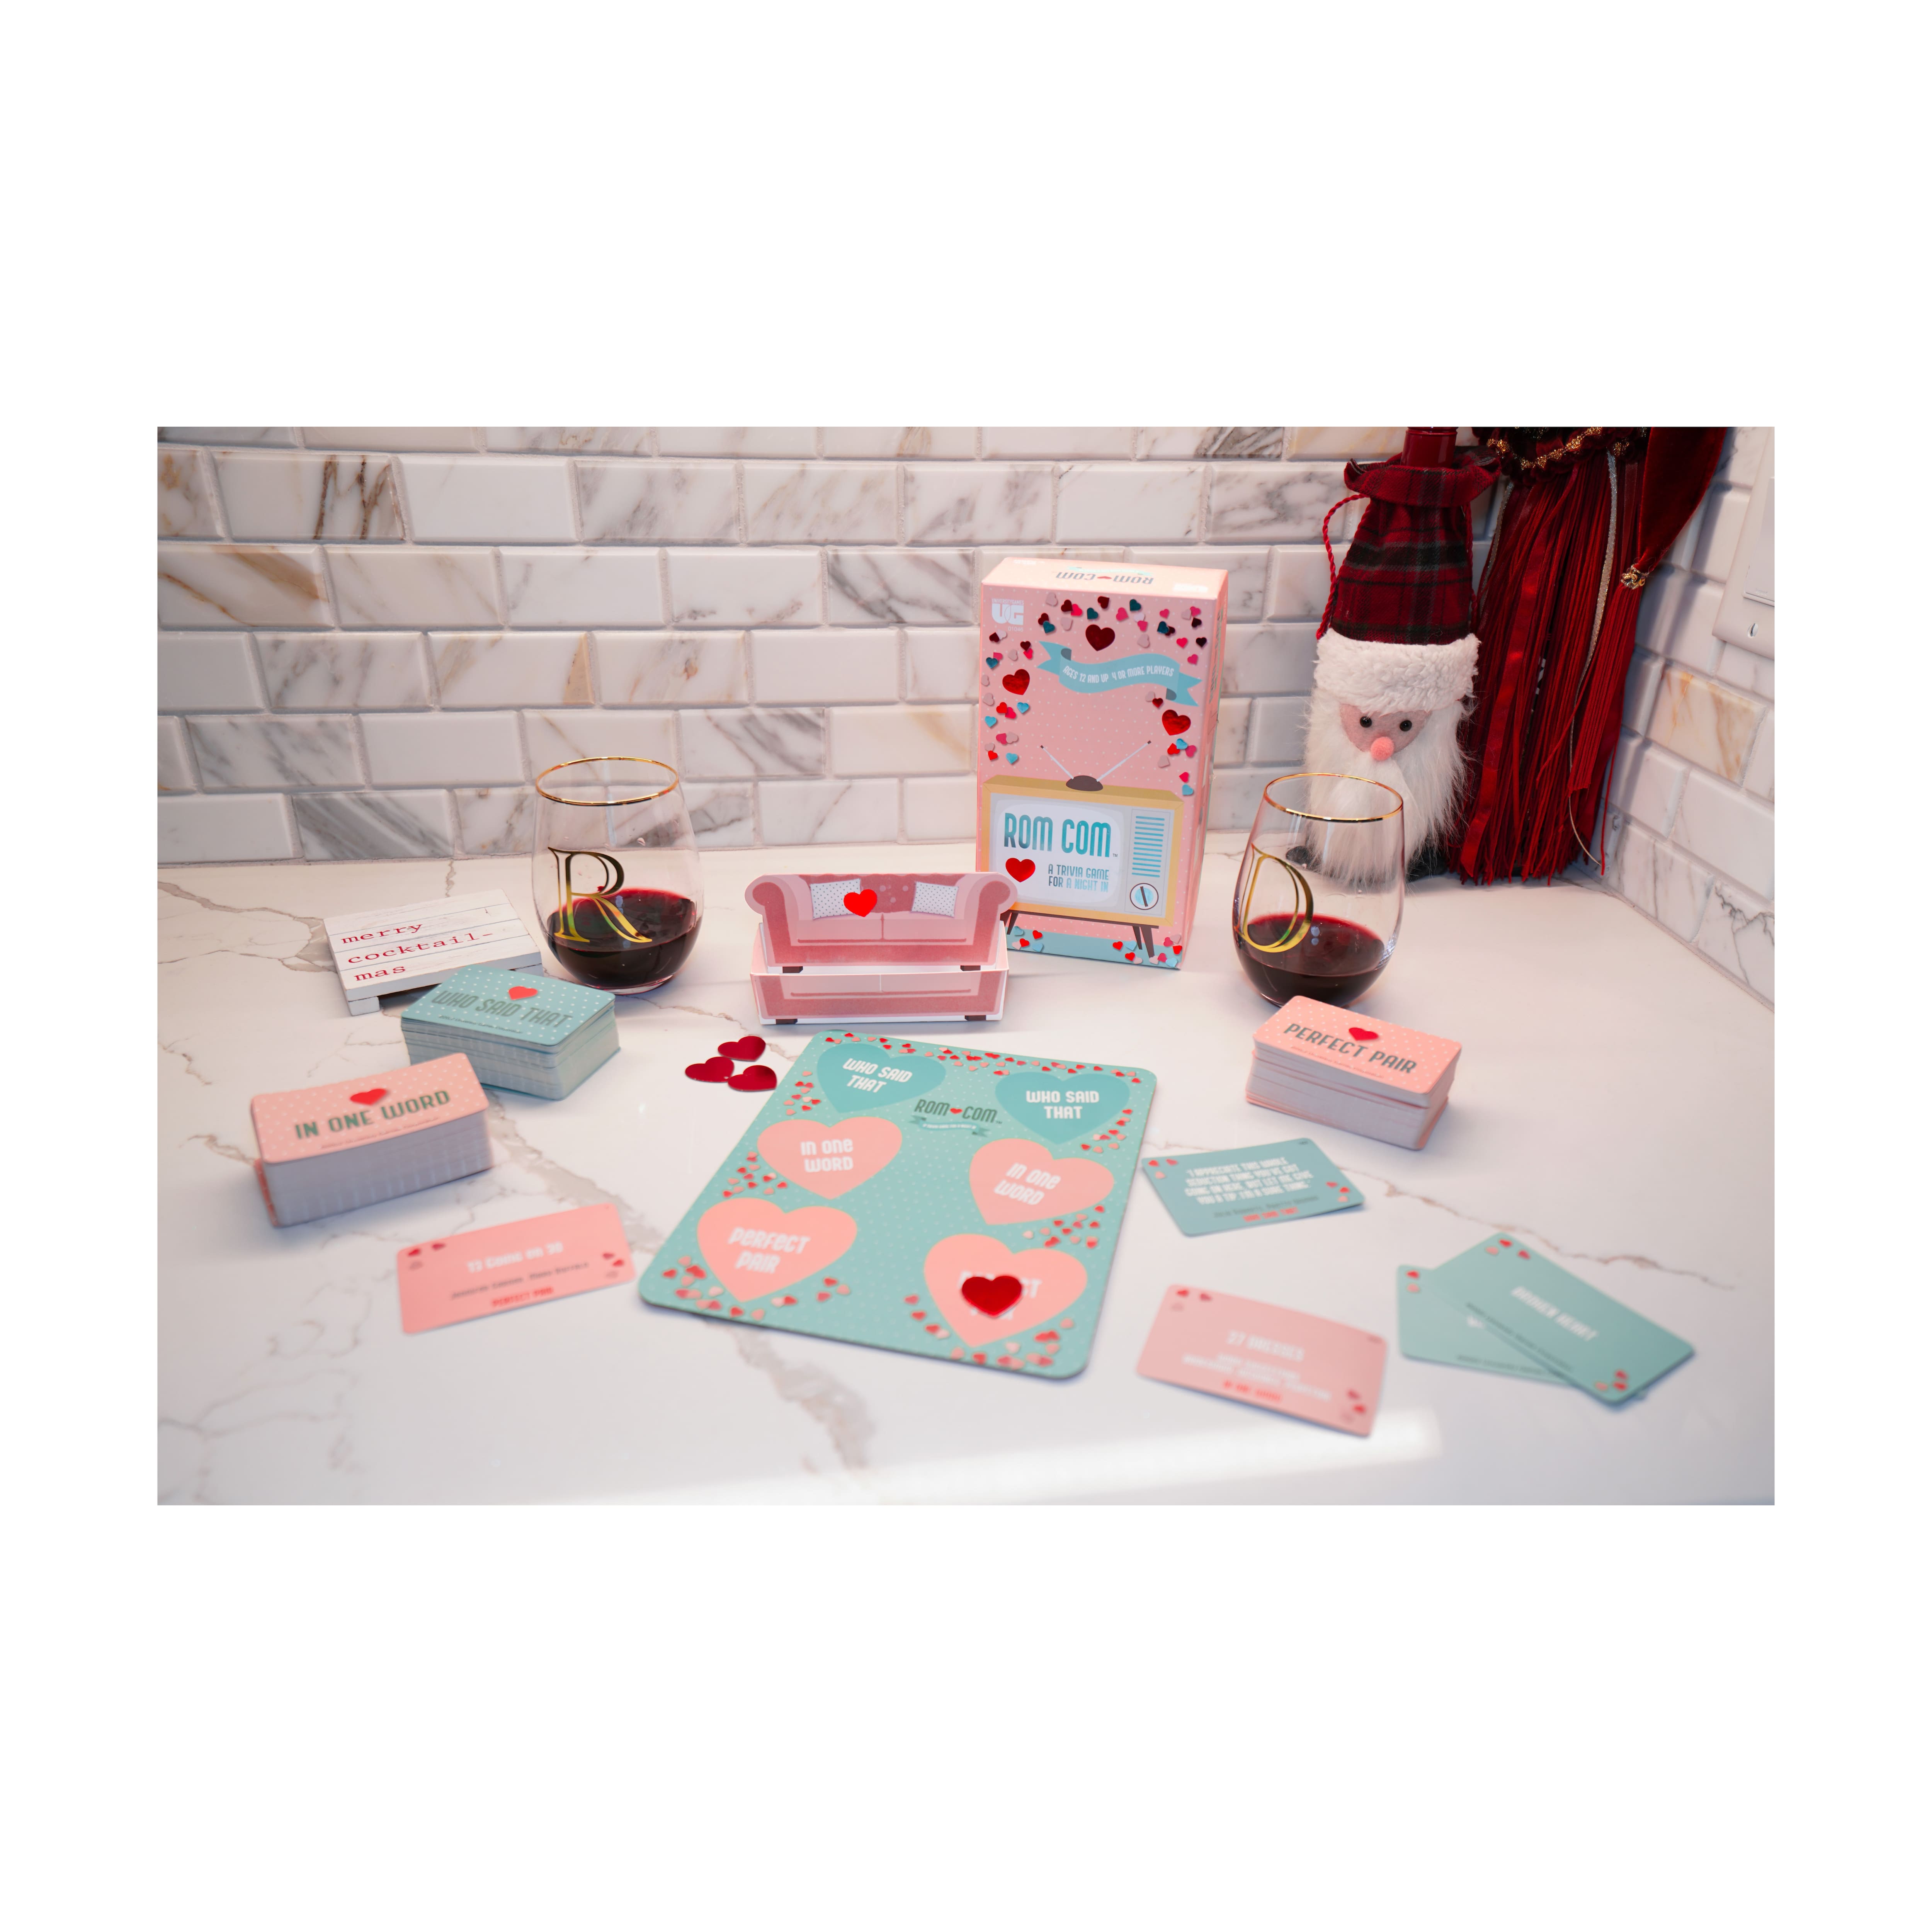 Rom Com - A Trivia Game for a Night In